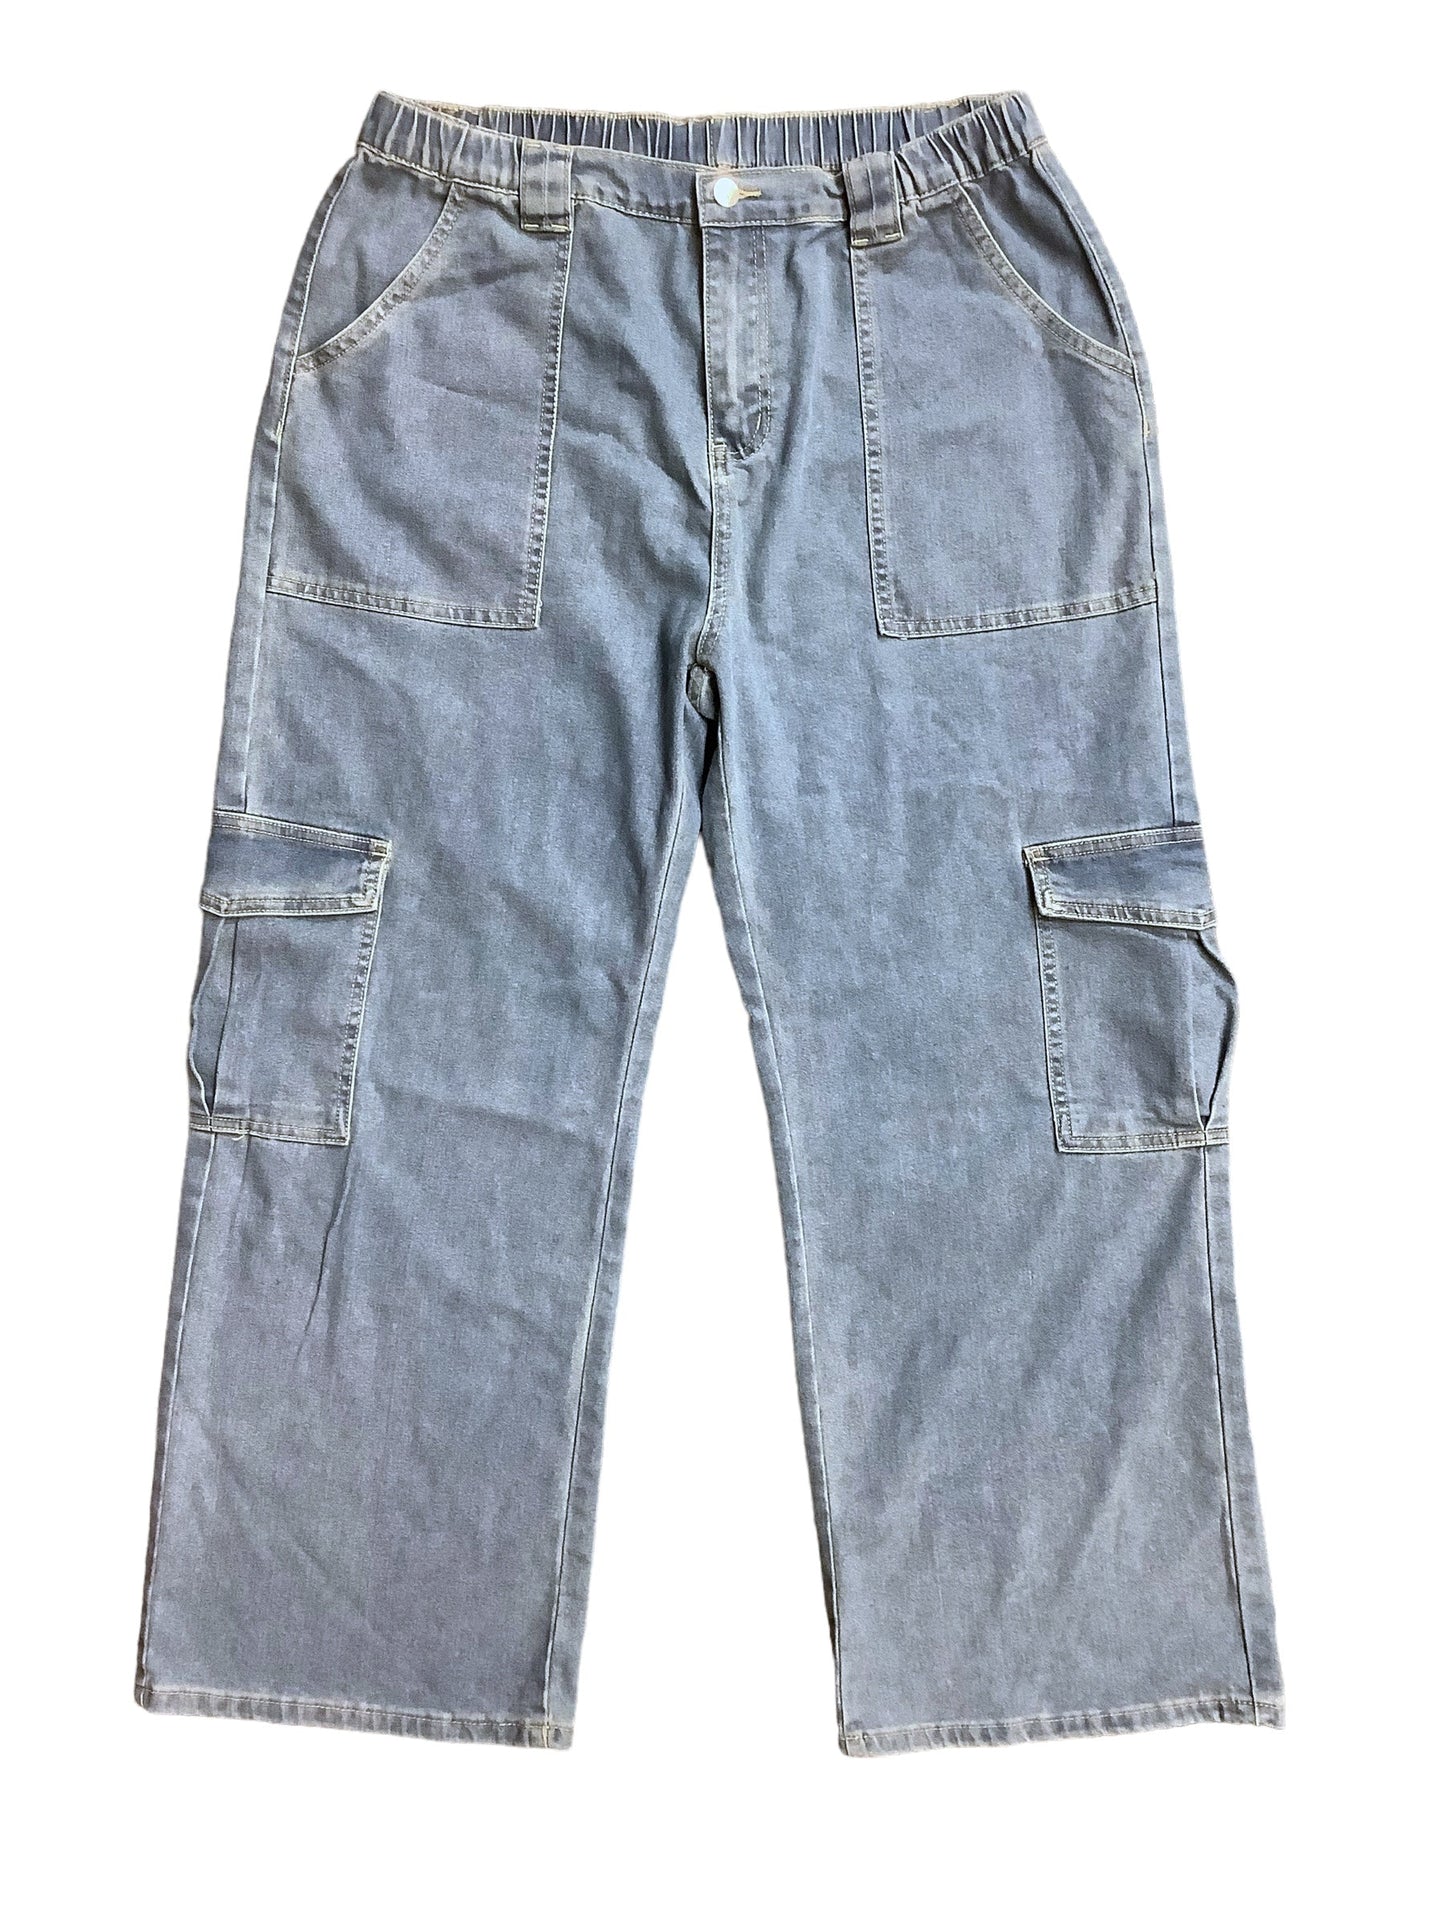 Blue Jeans Flared Clothes Mentor, Size 1x